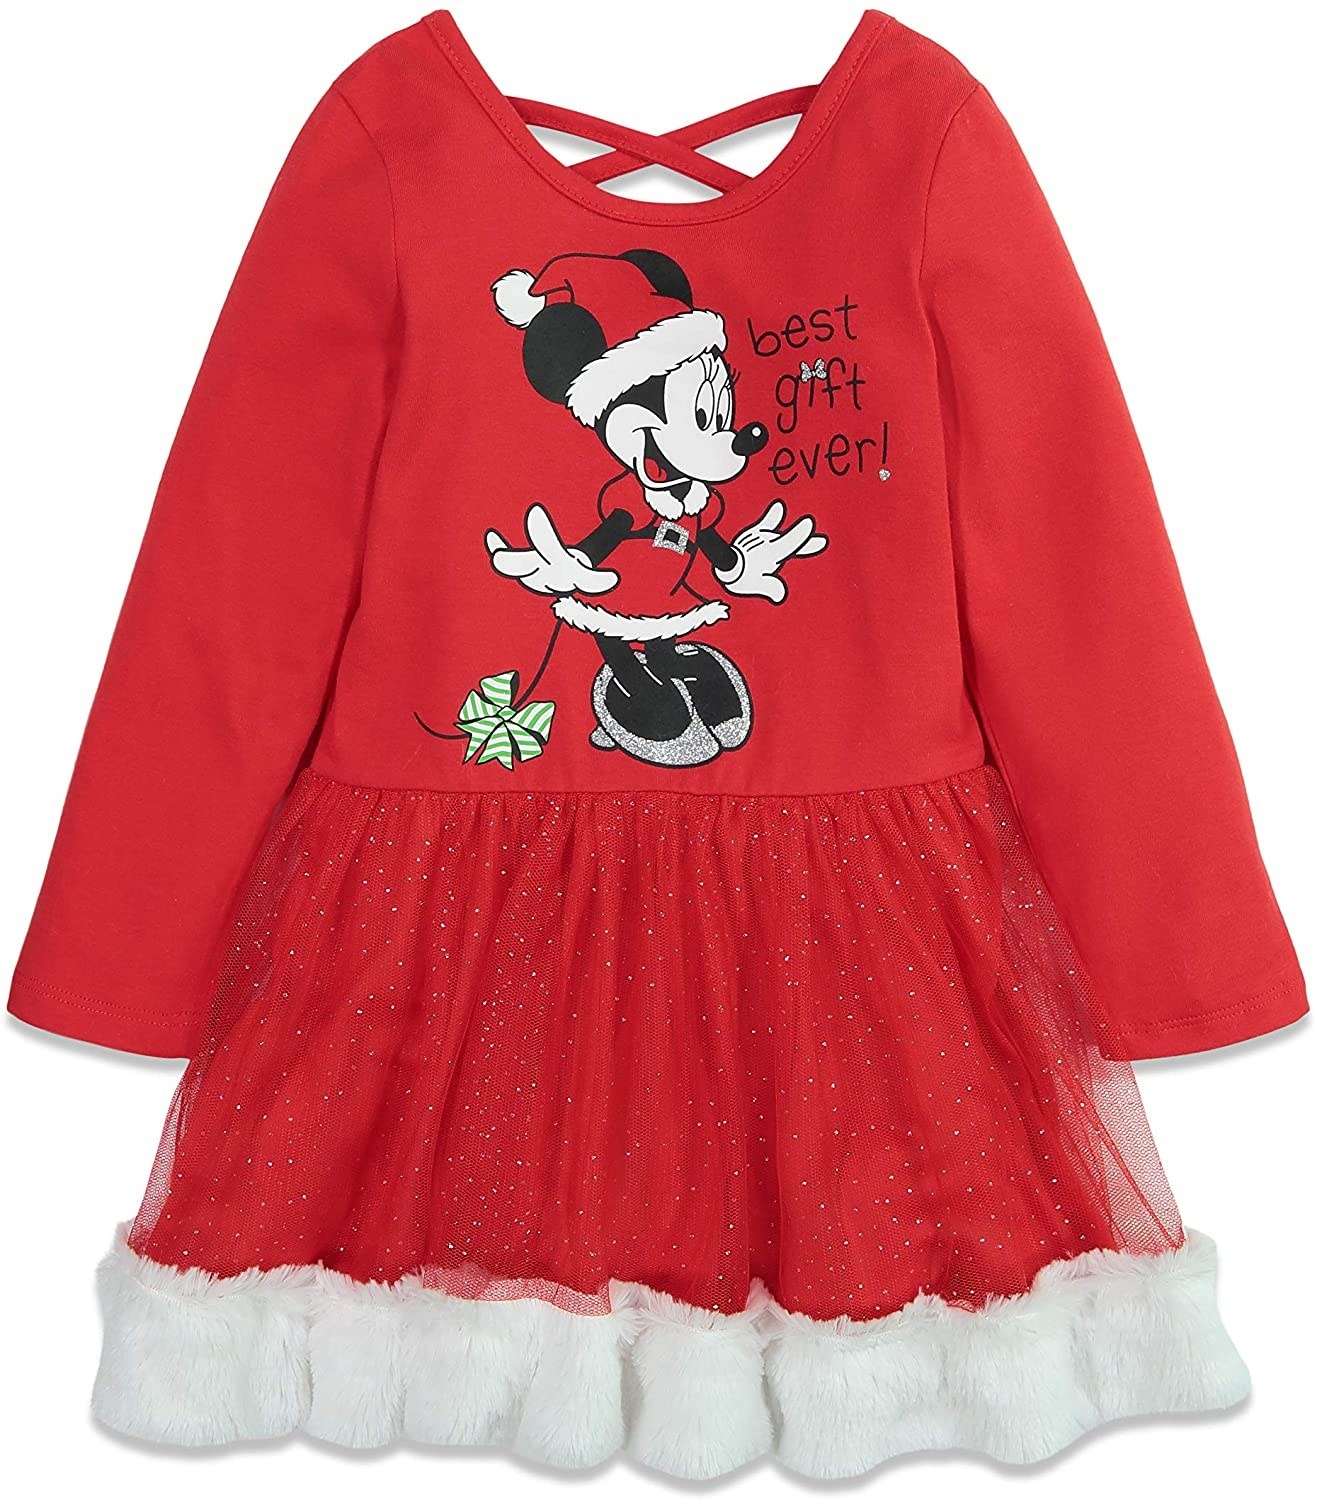 a red dress with minnie mouse on it, a sparkly tulle skirt, and white faux fur trim